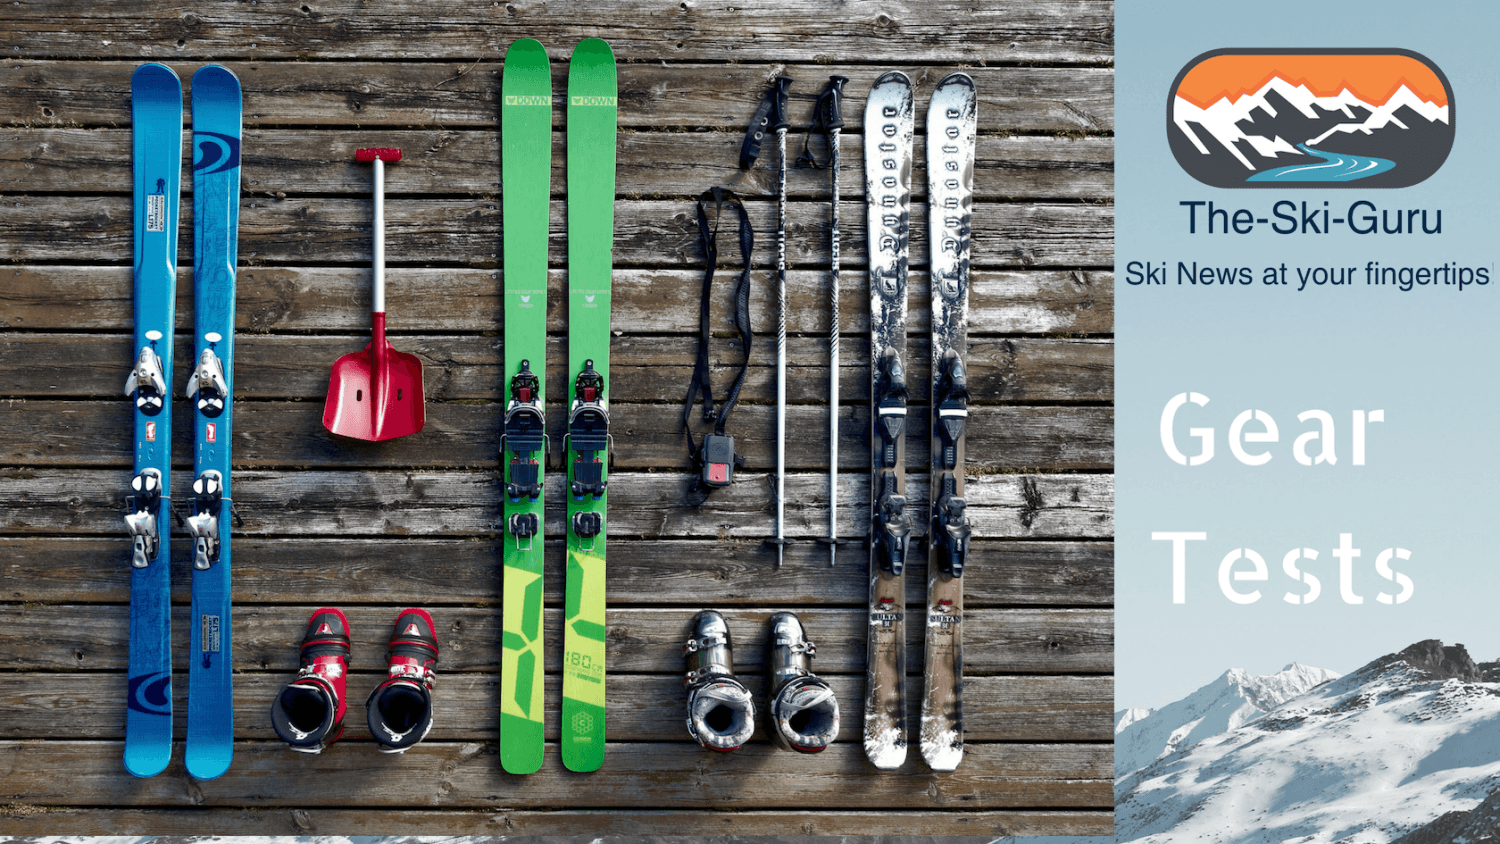 Gear Tests- the new Howell 800 Pro ACL Friendly. The new Future of Ski Bindings is here: Howell 880 Pro ACL friendly ski binding.